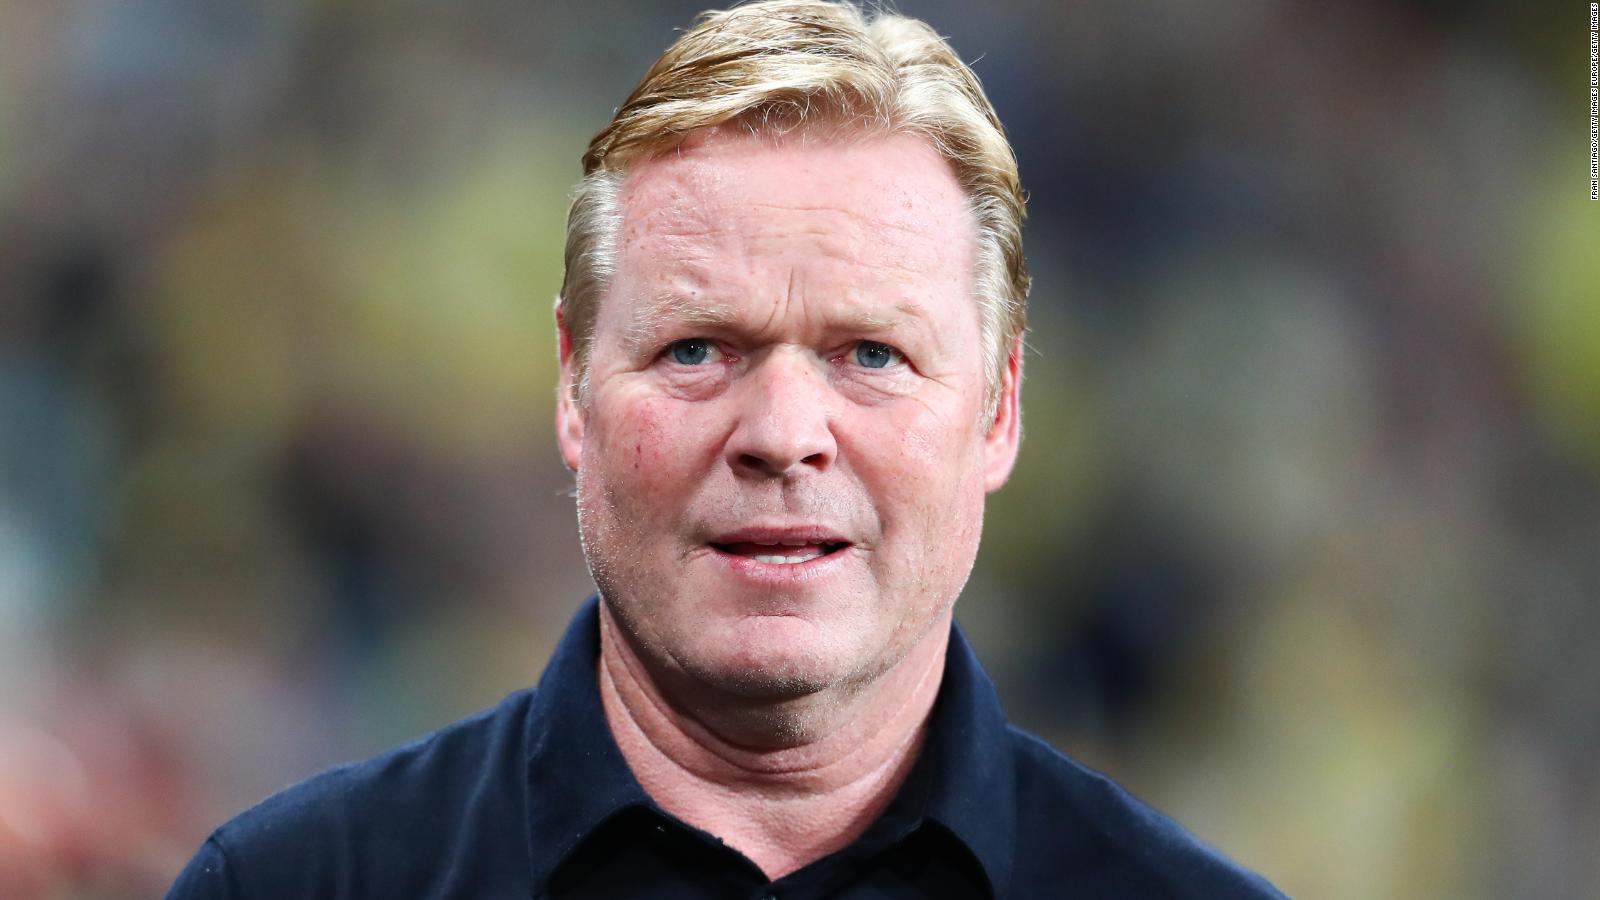 Ronald Koeman and other sacked managers in 2021/2022 season